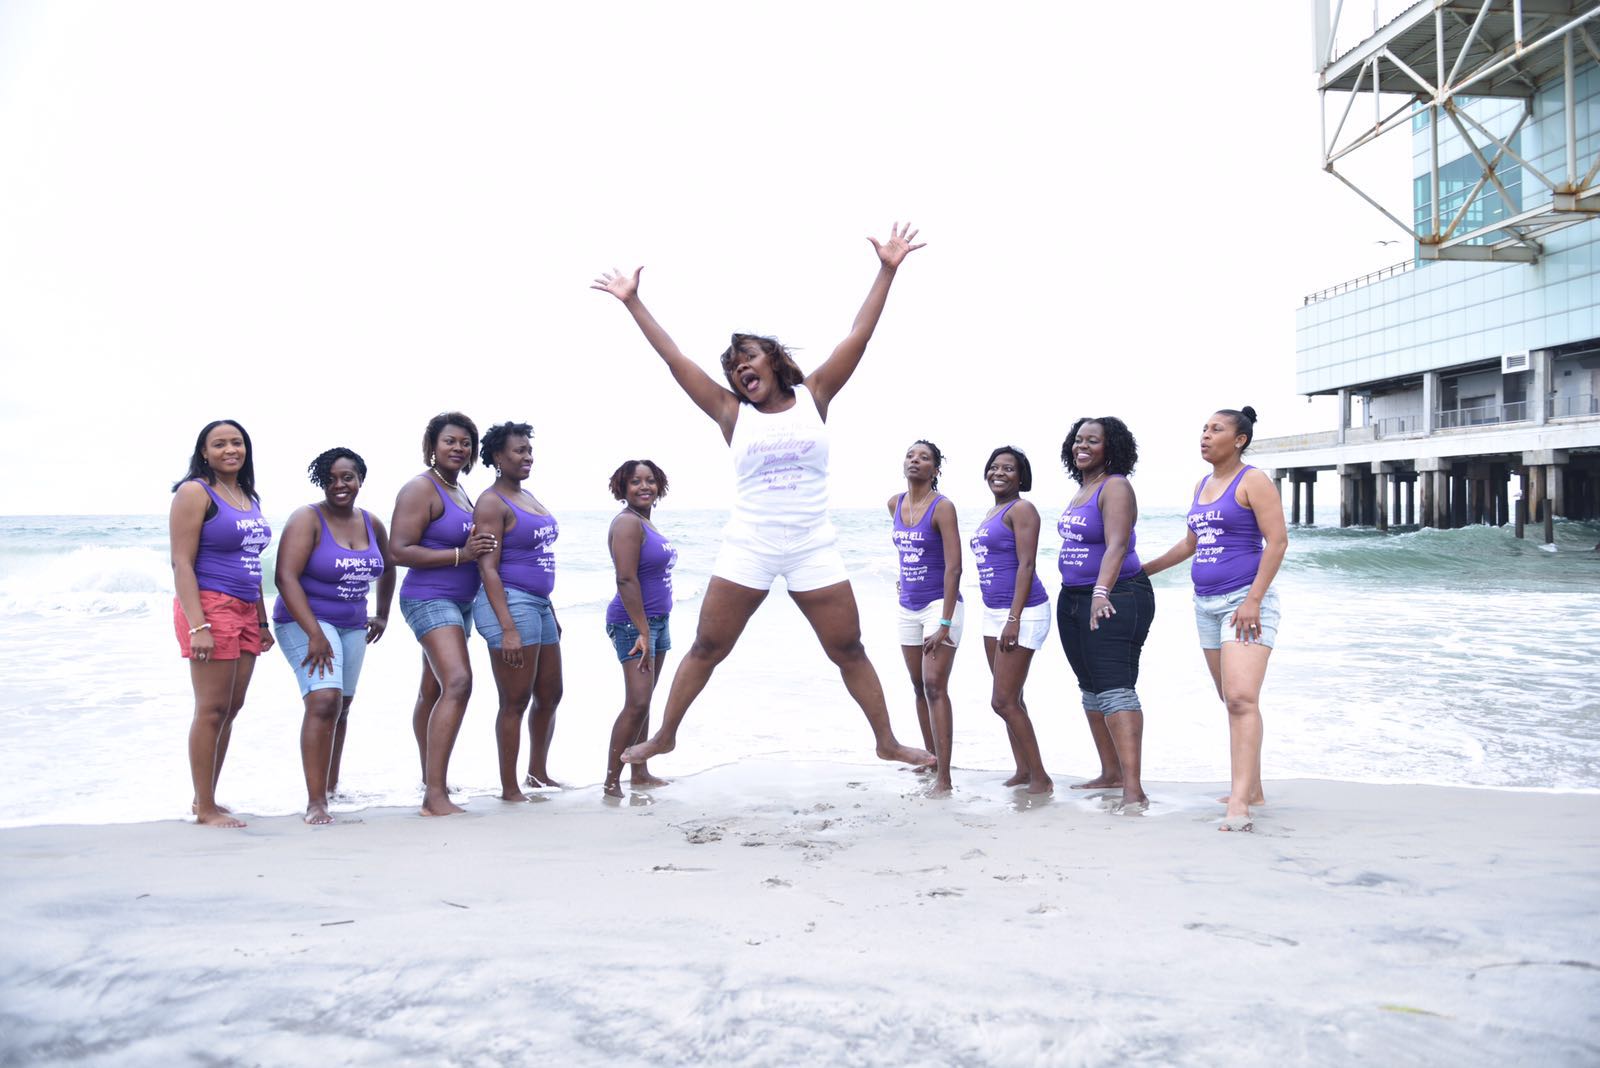 A group at a bachelorette party wearing matching custom t-shirts poses on the beach. The bride is wearing a white shirt, and the others are wearing purple. 